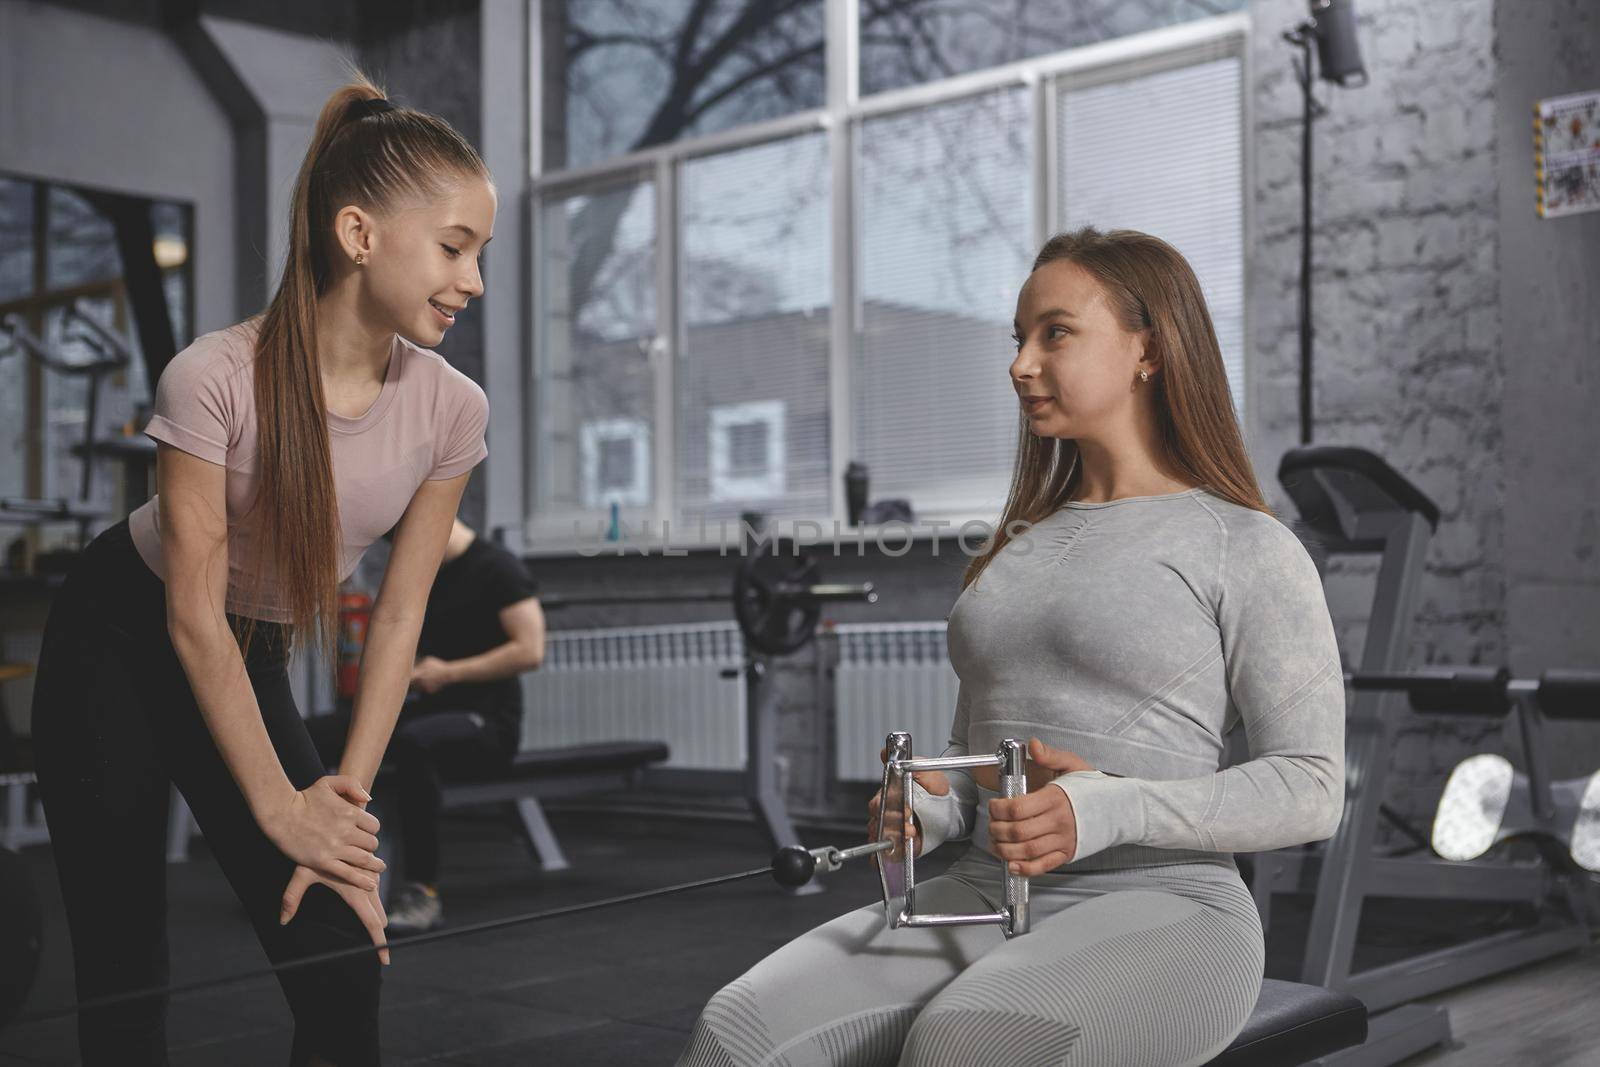 Teen girl watching her personal trainer explaing rowing machine exercise